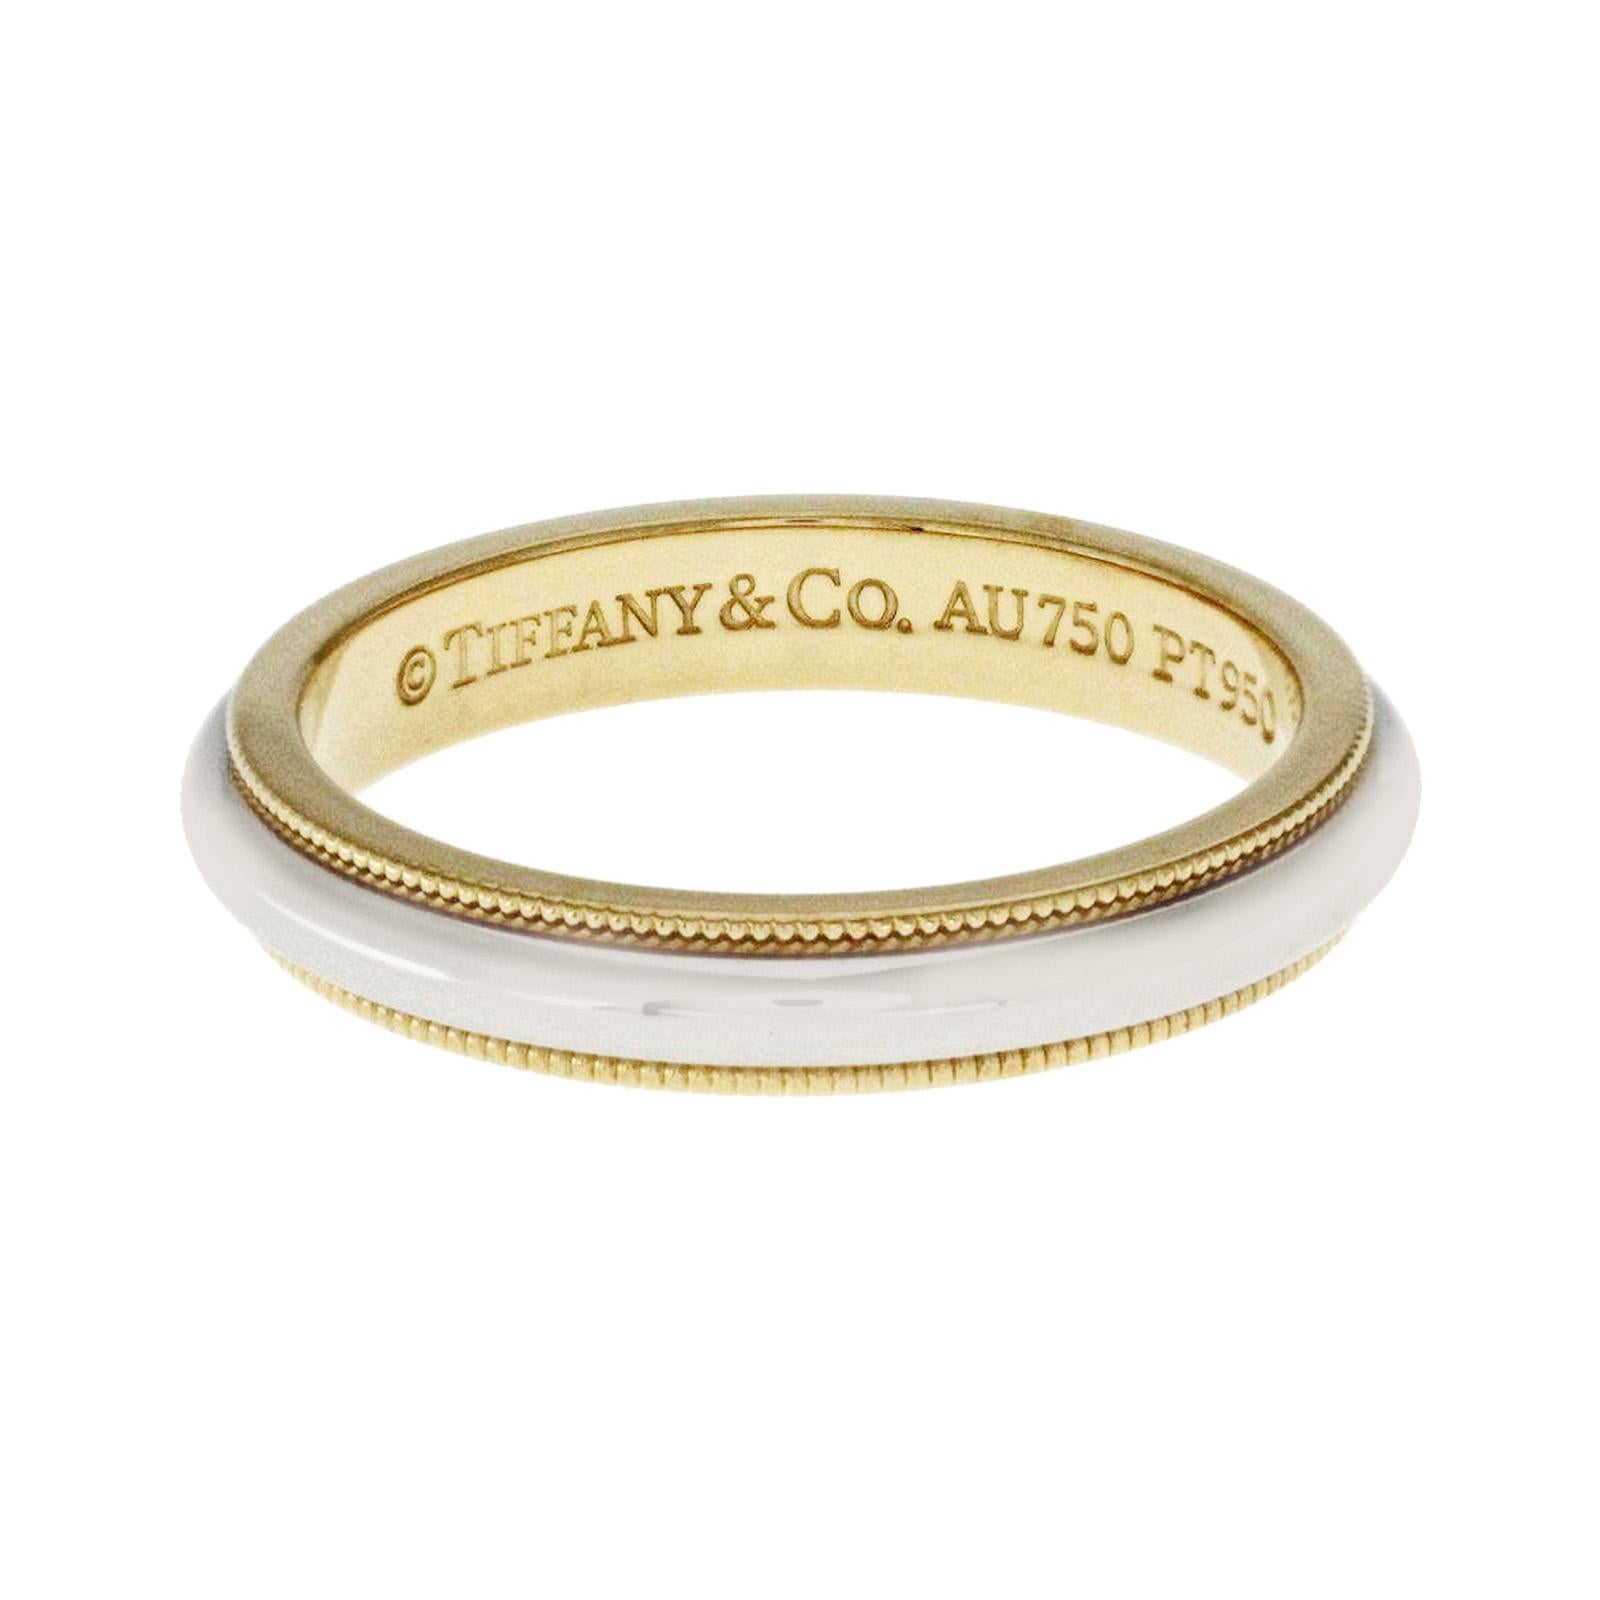 100% Authentic, 100% Customer Satisfaction

Top: 3 mm

Band Width: 3 mm

 Metal: 18K Yellow Gold & 950 Platinum

 Size: 7

 Hallmarks: Tiffany & Co 750 PT950

 Total Weight: 5.6 Grams

 Stone Type: None

 Condition: Pre Owned 